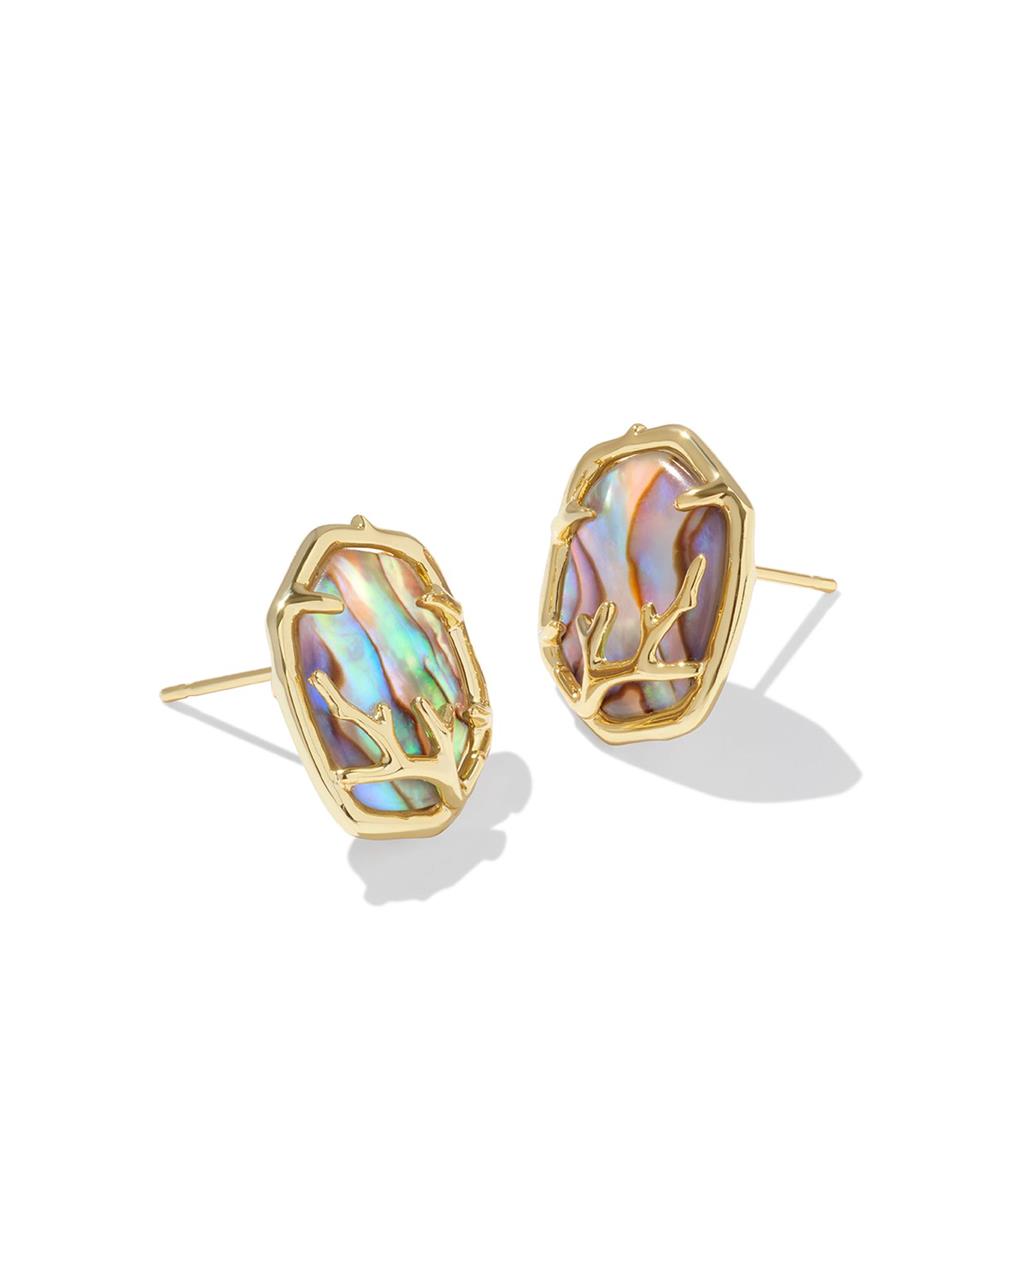 DAPHNE CORAL FRAME STUD EARRINGS GOLD ABALONE